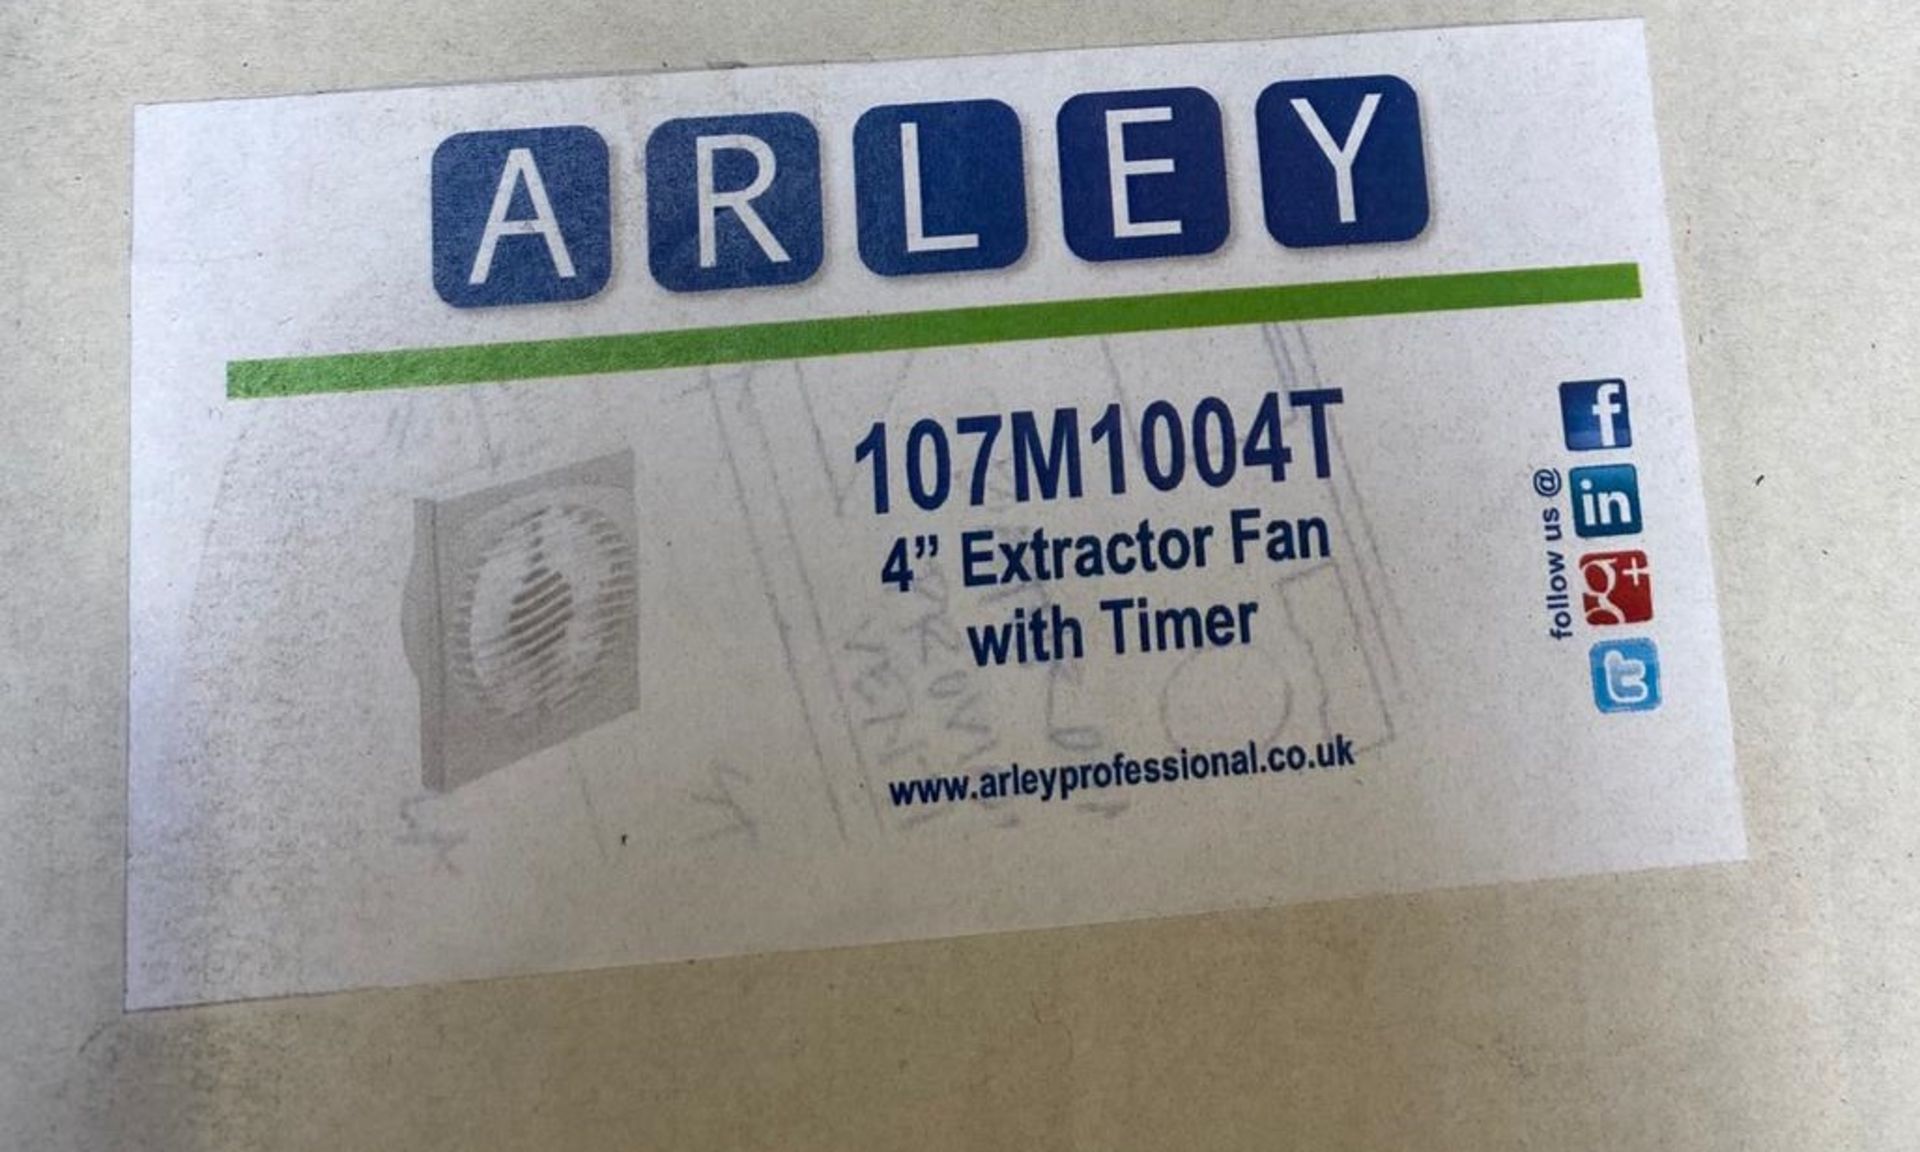 1 x Arley 4" Extractor Fan with Timer - Code: 107M1004T - New Stock - Location: Altrincham WA14 -